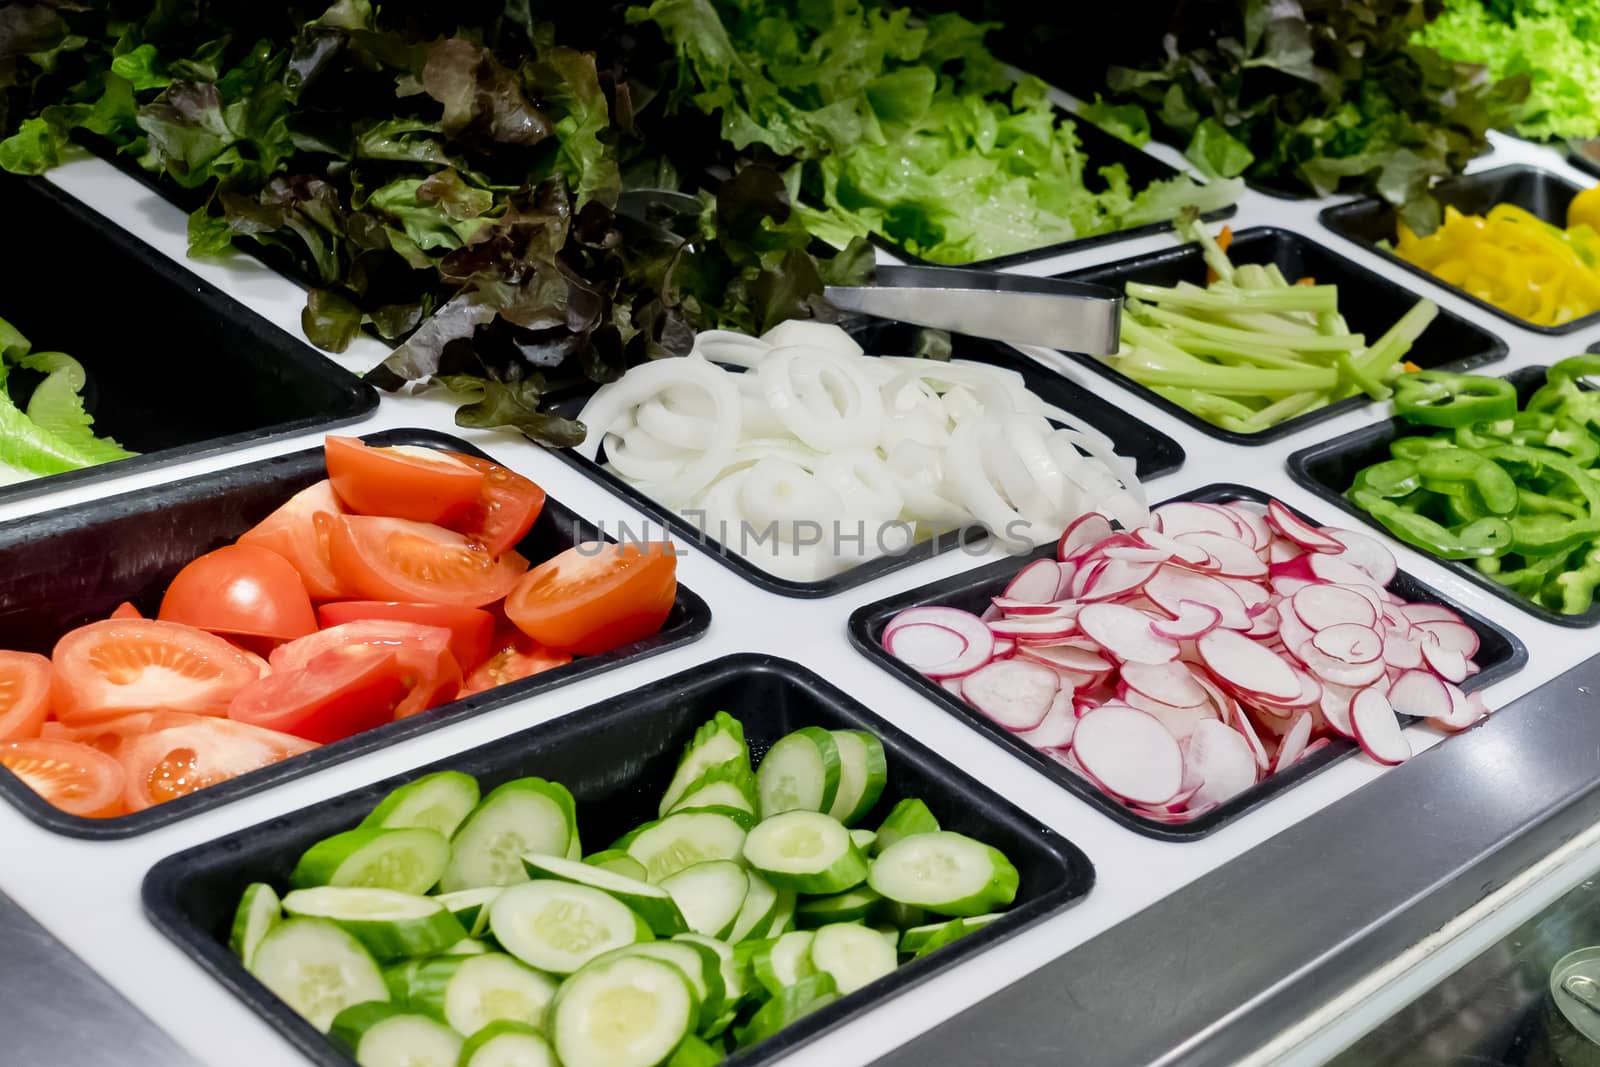 salad bar with vegetables in the supermarket, healthy food by art9858